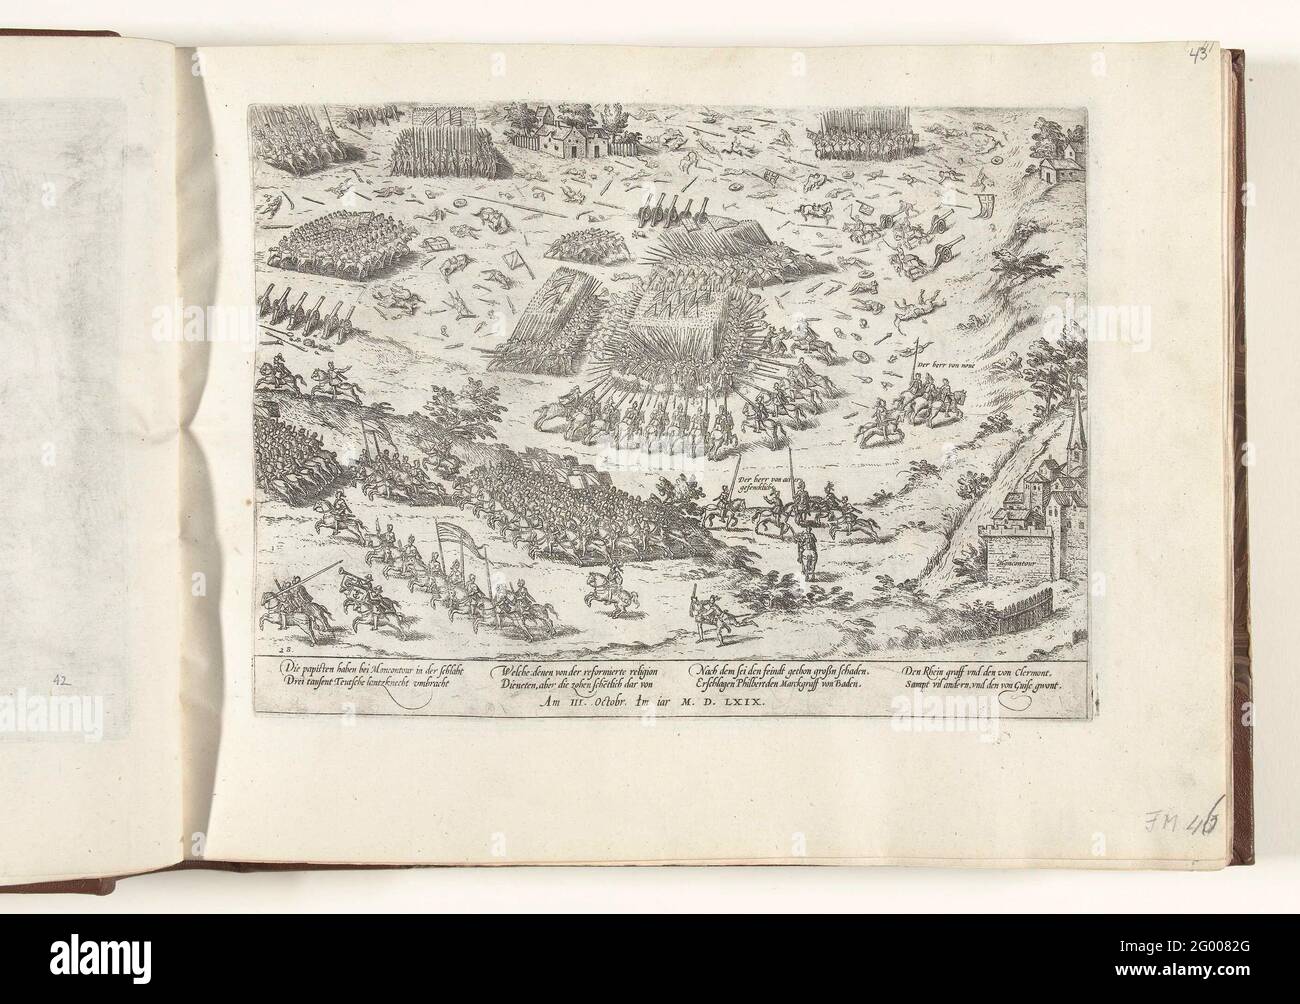 Battle of Moncontour, 1569; Series 3: French religious wars, 1559-1573. Battle of Moncontour, October 3, 1569. View of the battlefield. With caption of 8 rules in German. Numbered: 28. Stock Photo